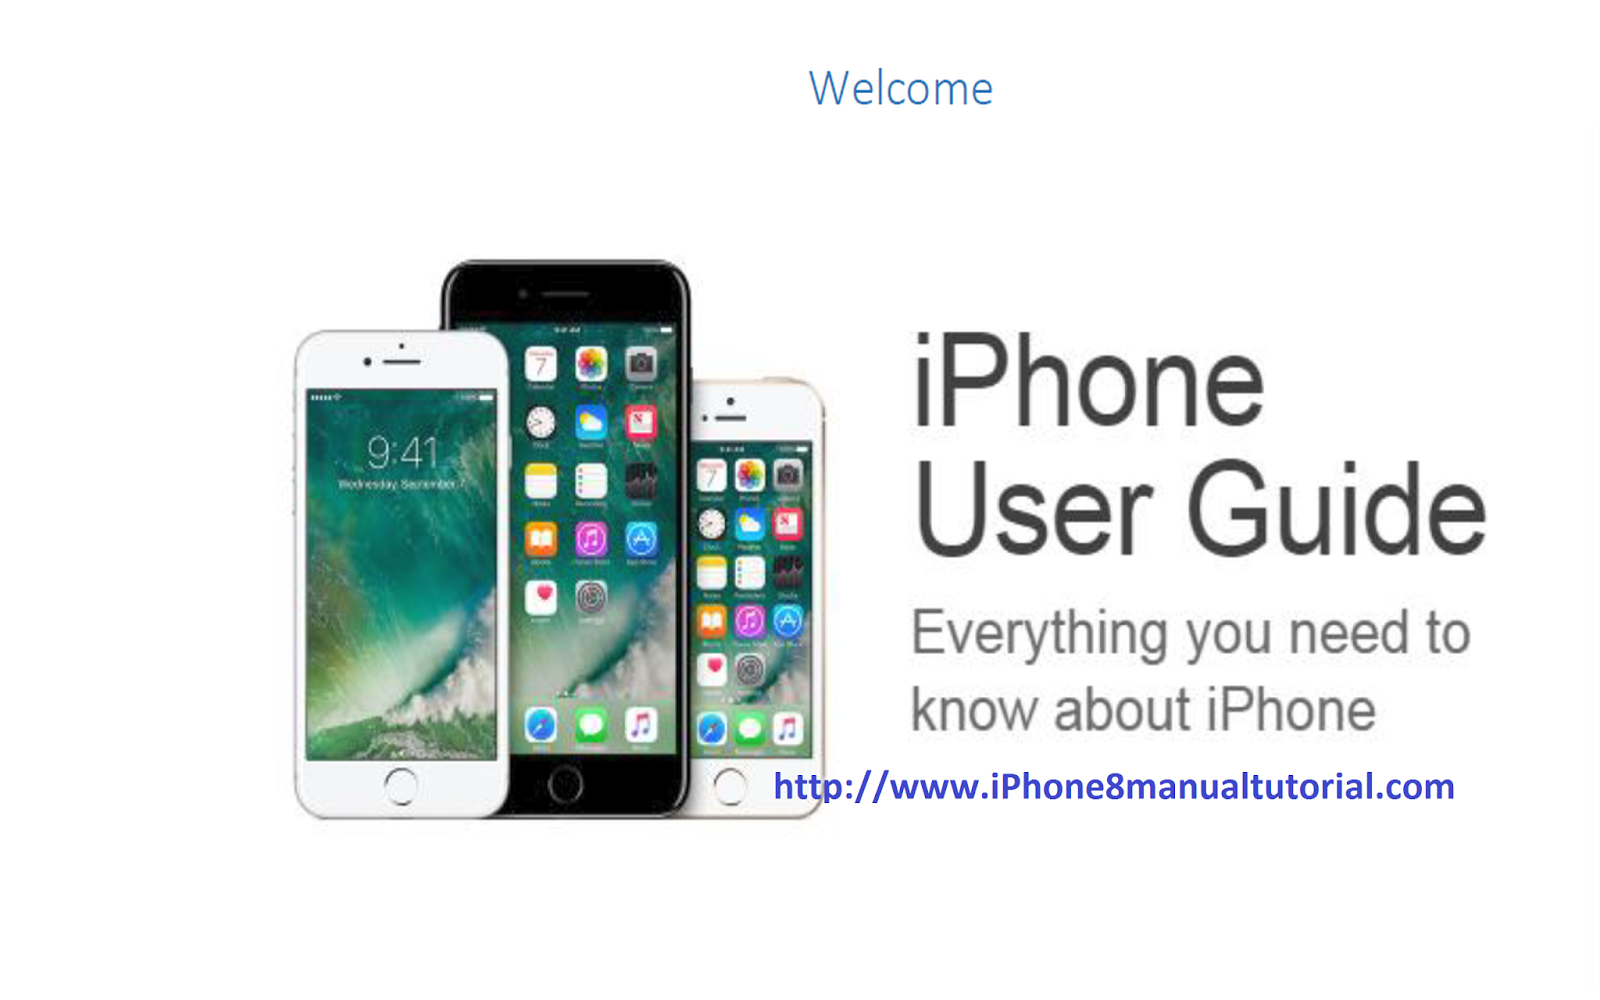 iphone 8 user guide pdf download